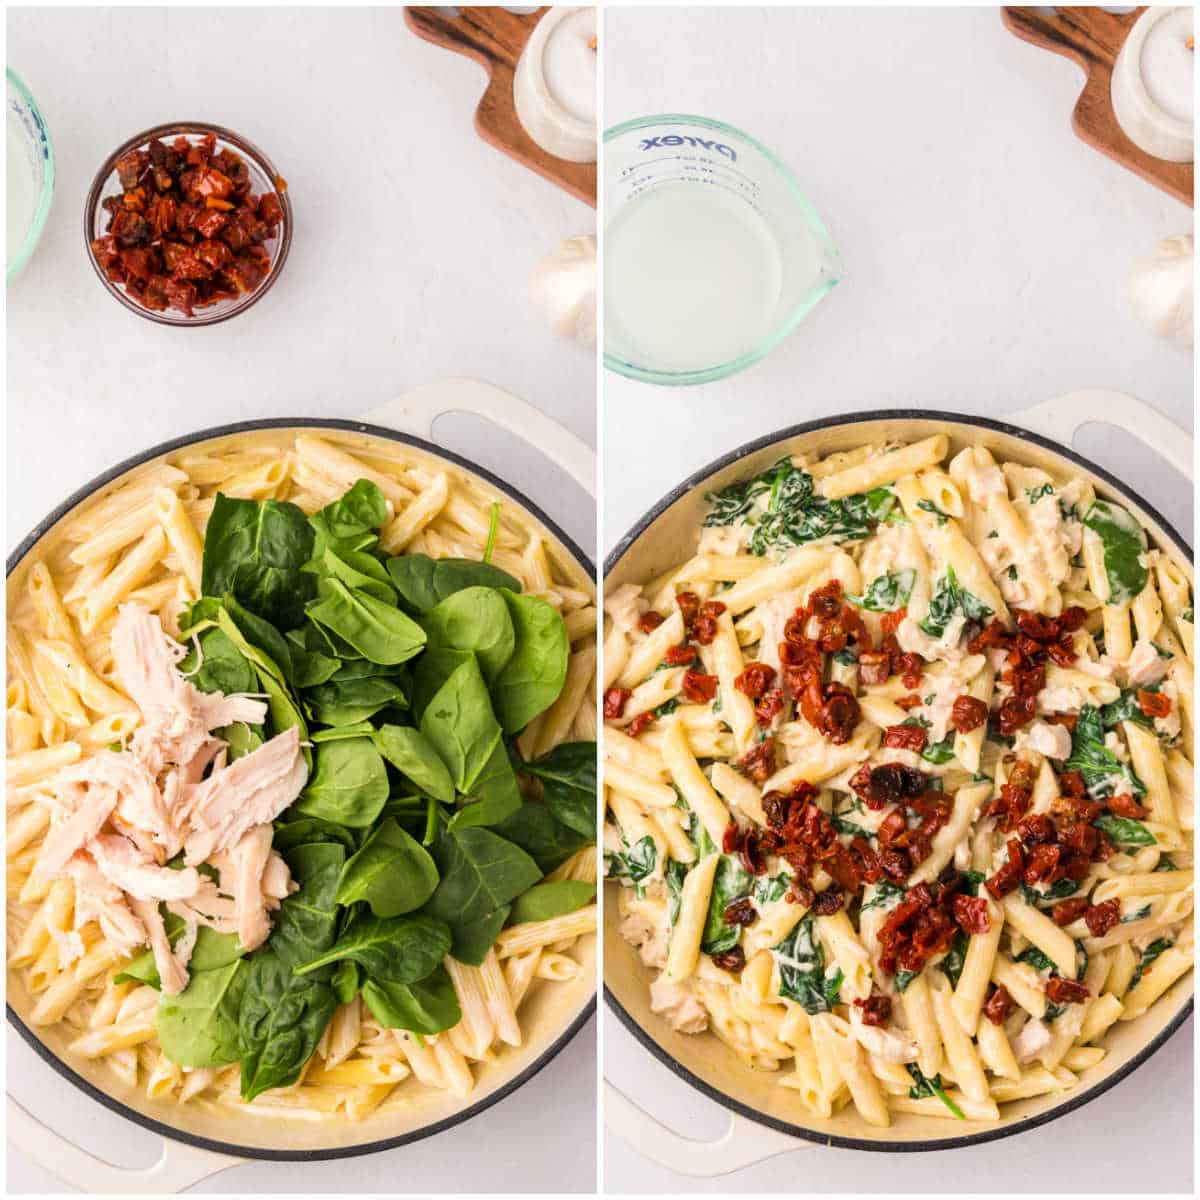 Steps to make chicken and spinach pasta.